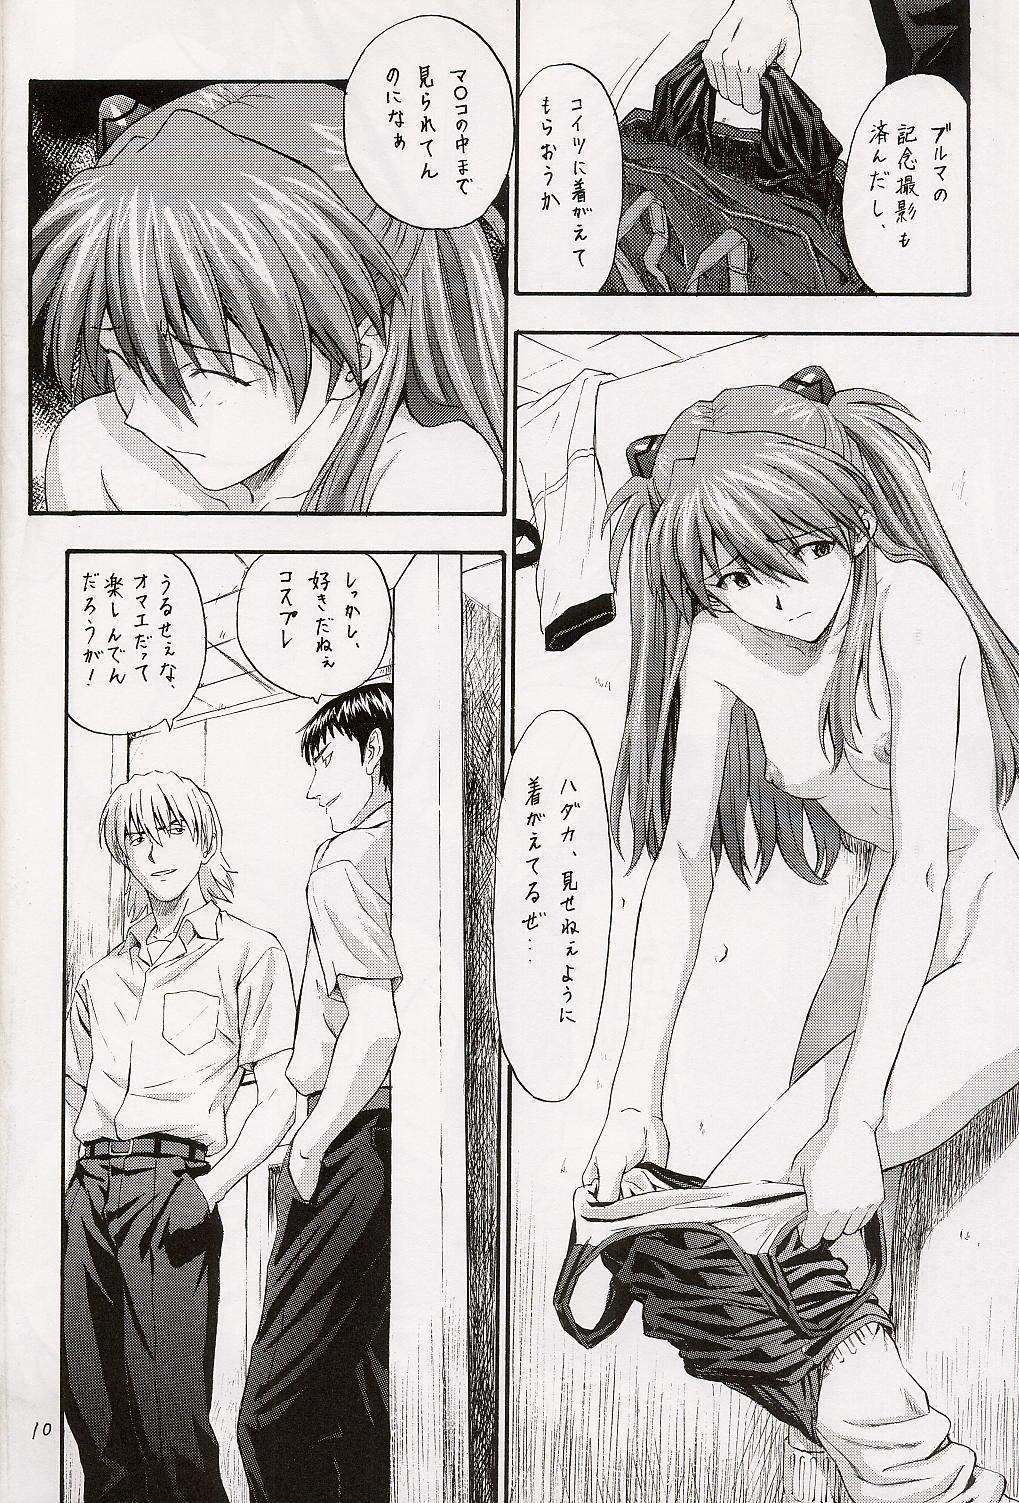 Alone A-three - Neon genesis evangelion Reversecowgirl - Page 8